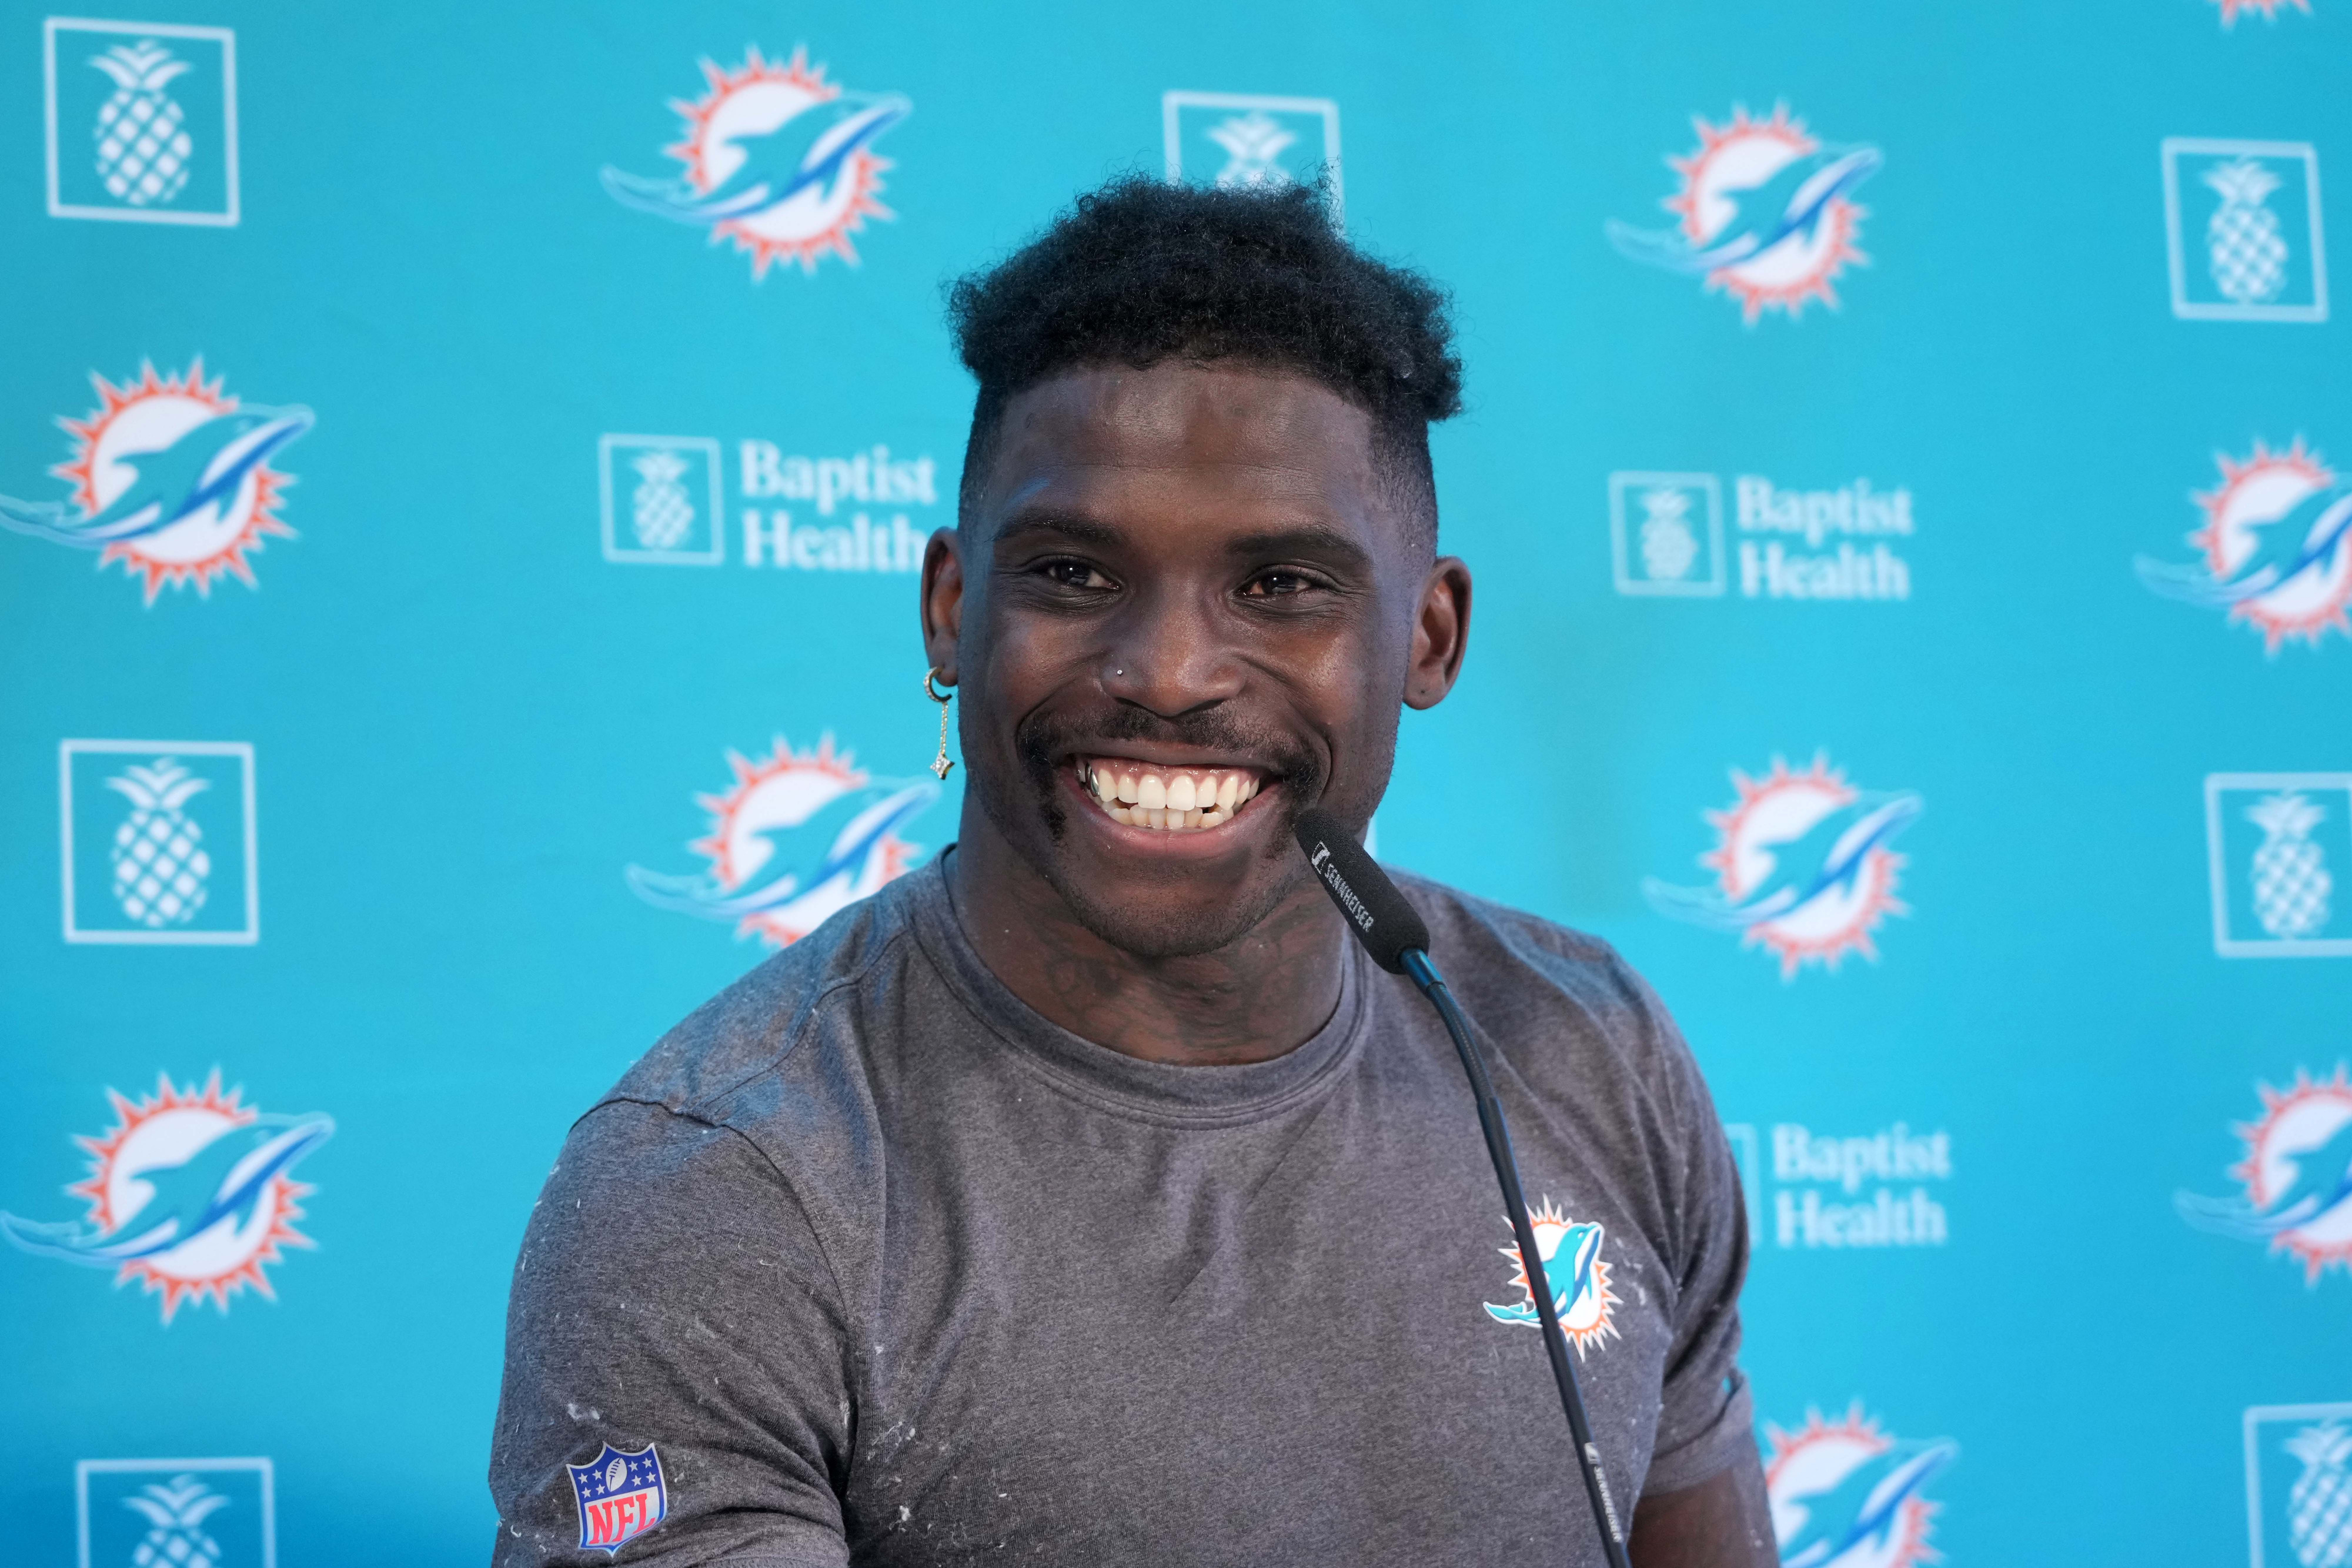 Nov 2, 2023; Frankfurt, Germany; Miami Dolphins wide receiver Tyreek Hill at press conference at the PSD Bank Arena. Mandatory Credit: Kirby Lee-USA TODAY Sports